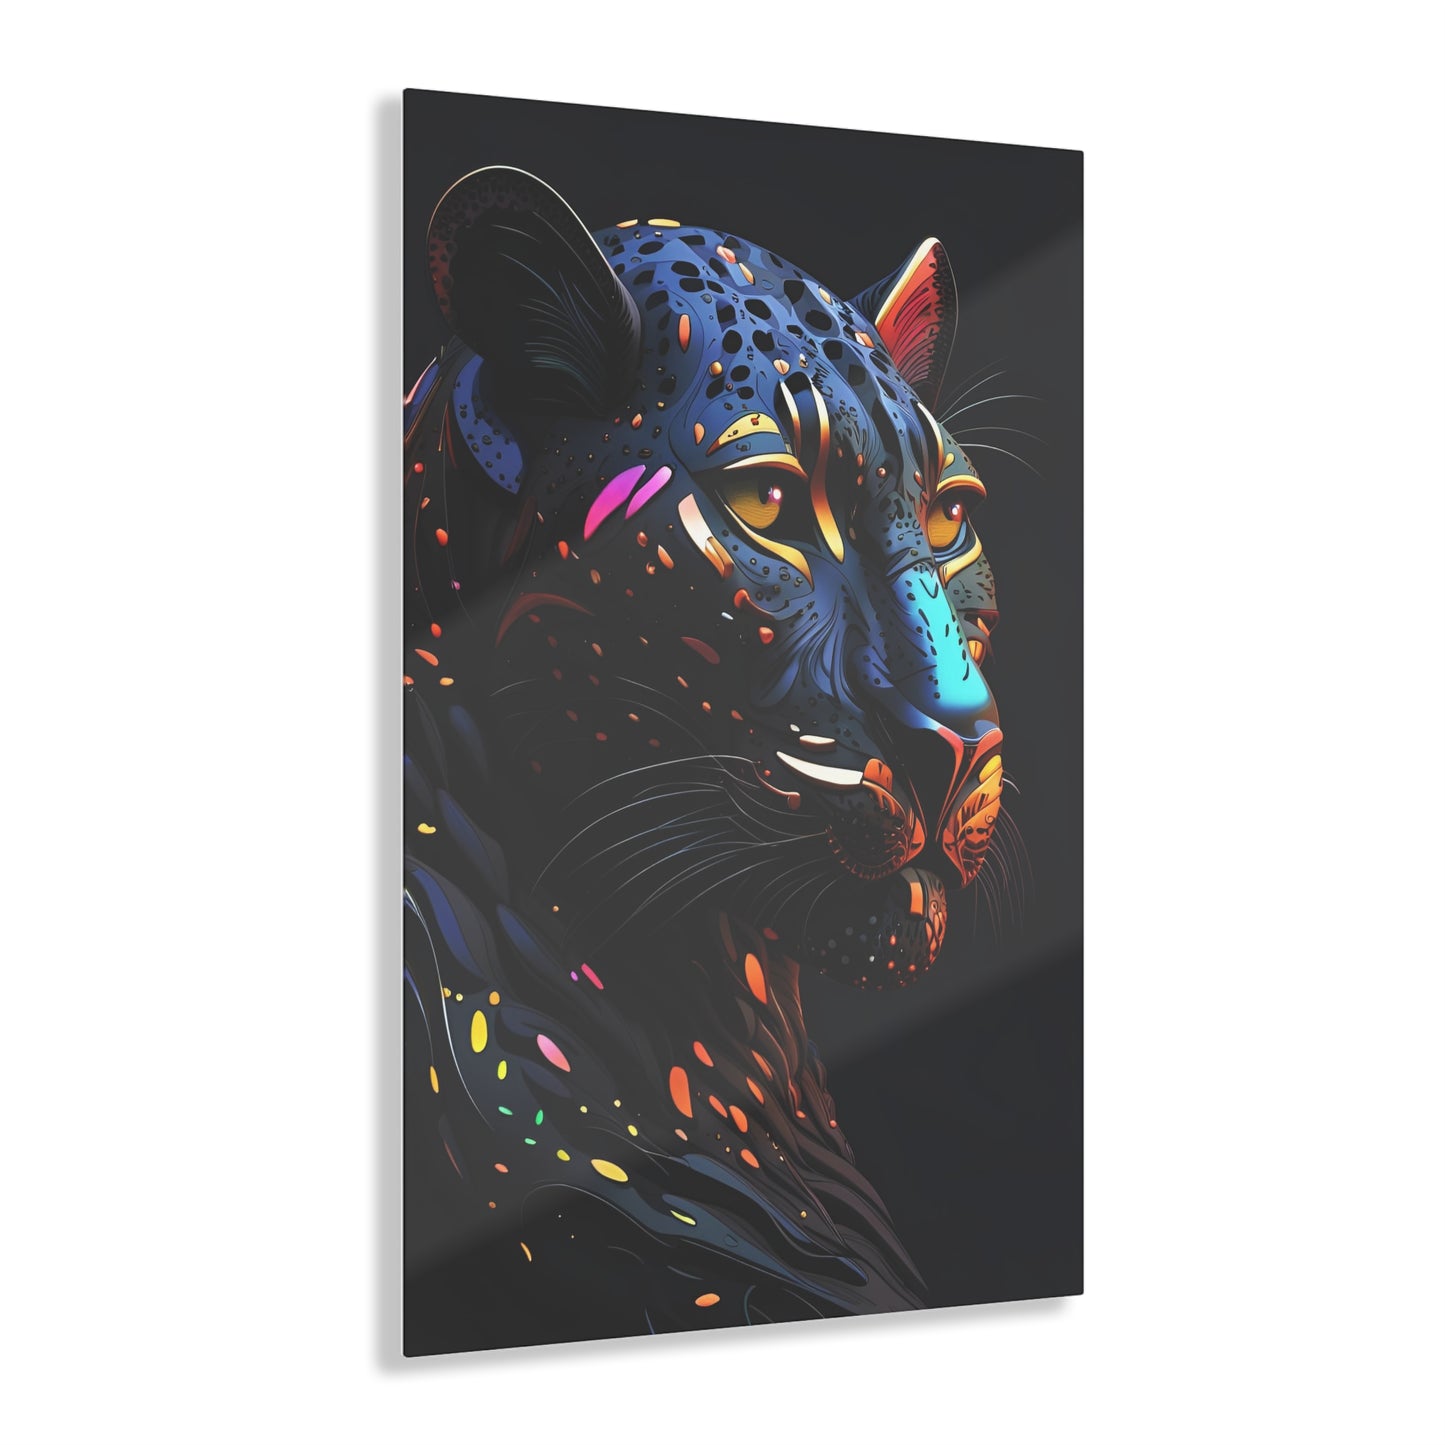 Stylized Colorful Black Panther Head printed on a crystal clear acrylic panel